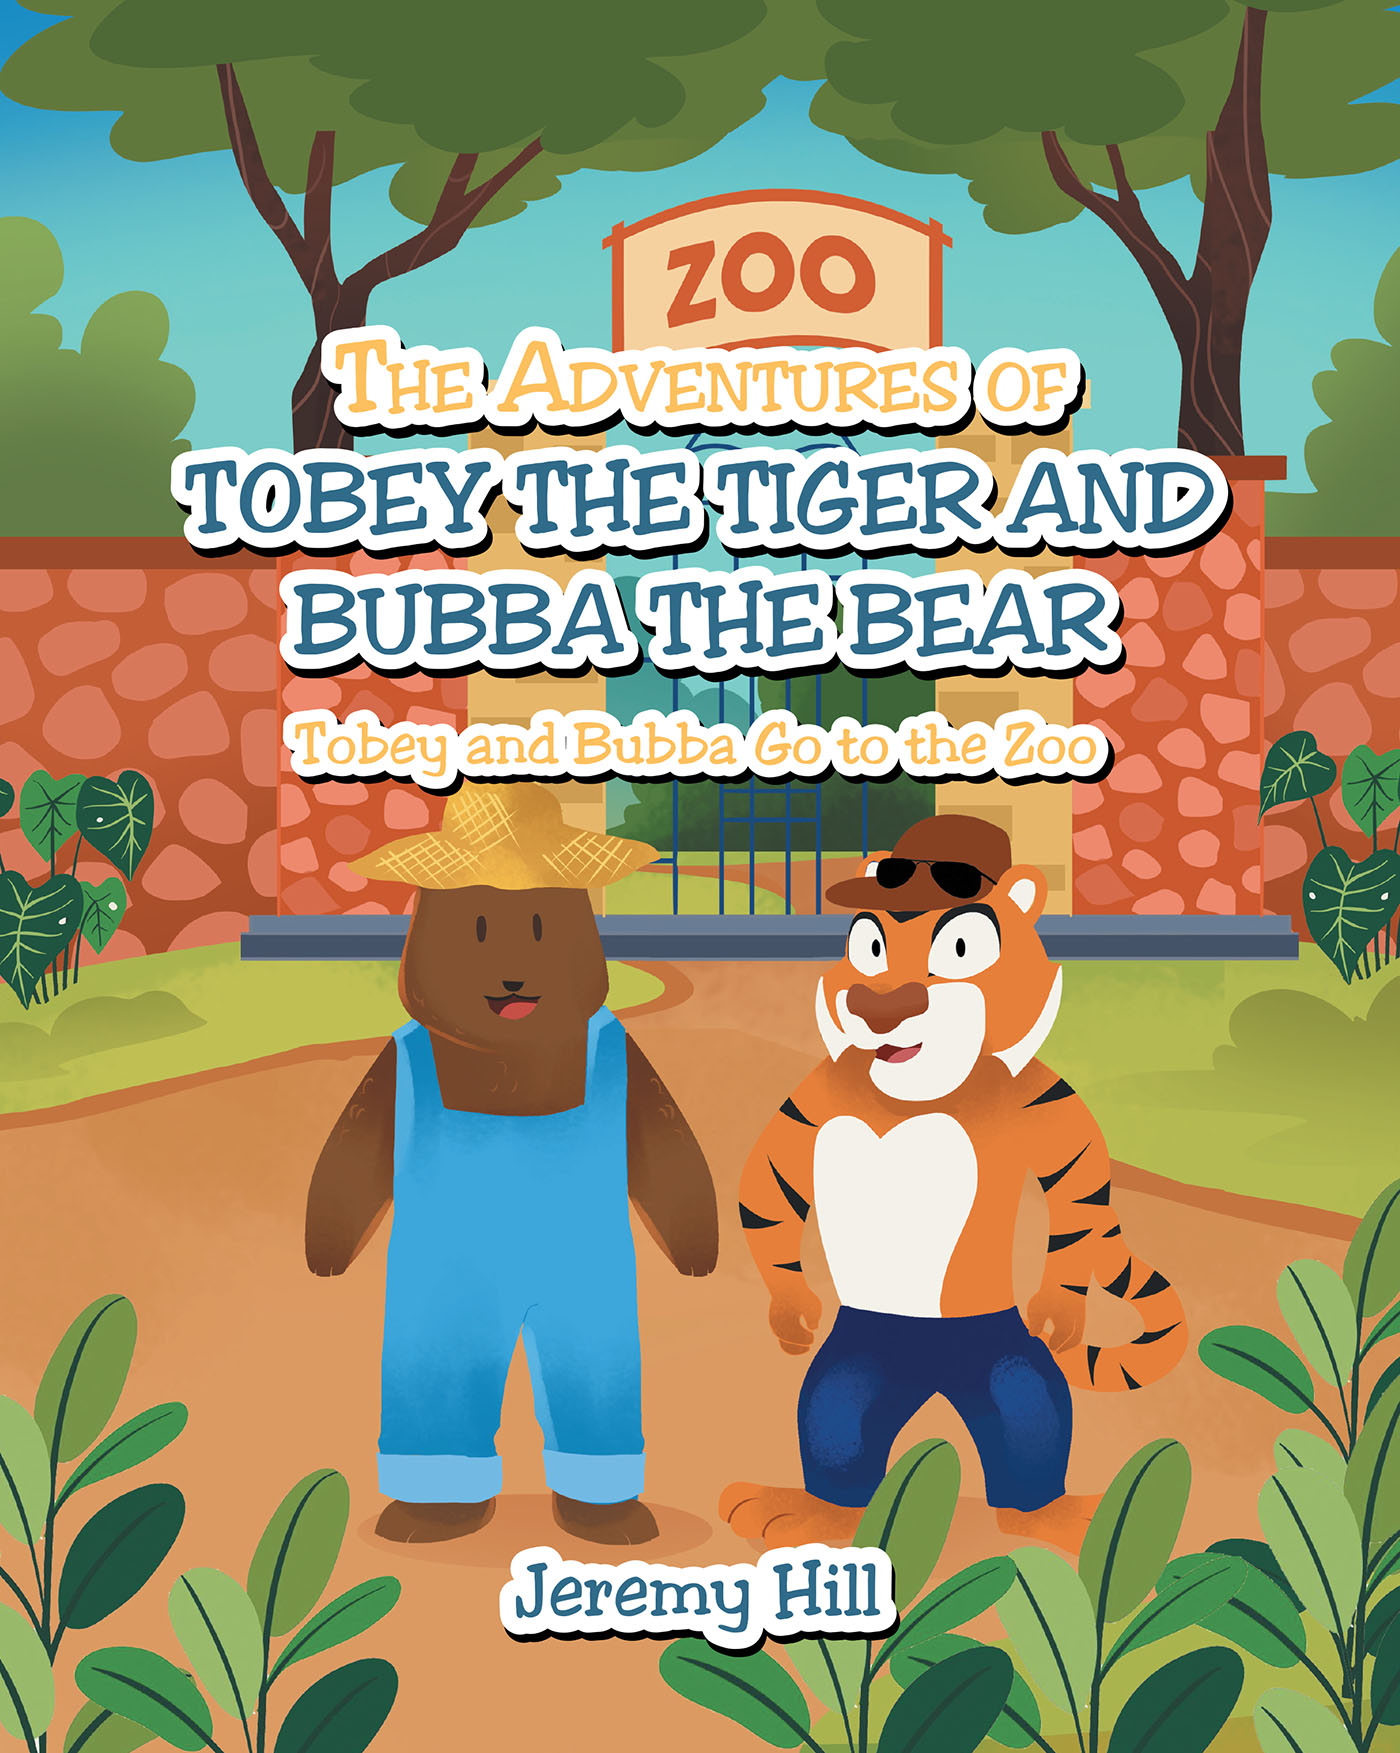 Author Jeremy Hill’s New Book, "The Adventures of Tobey the Tiger and Bubba the Bear: Tobey and Bubba Go to the Zoo," is a Story About Two Friends Going to the Zoo